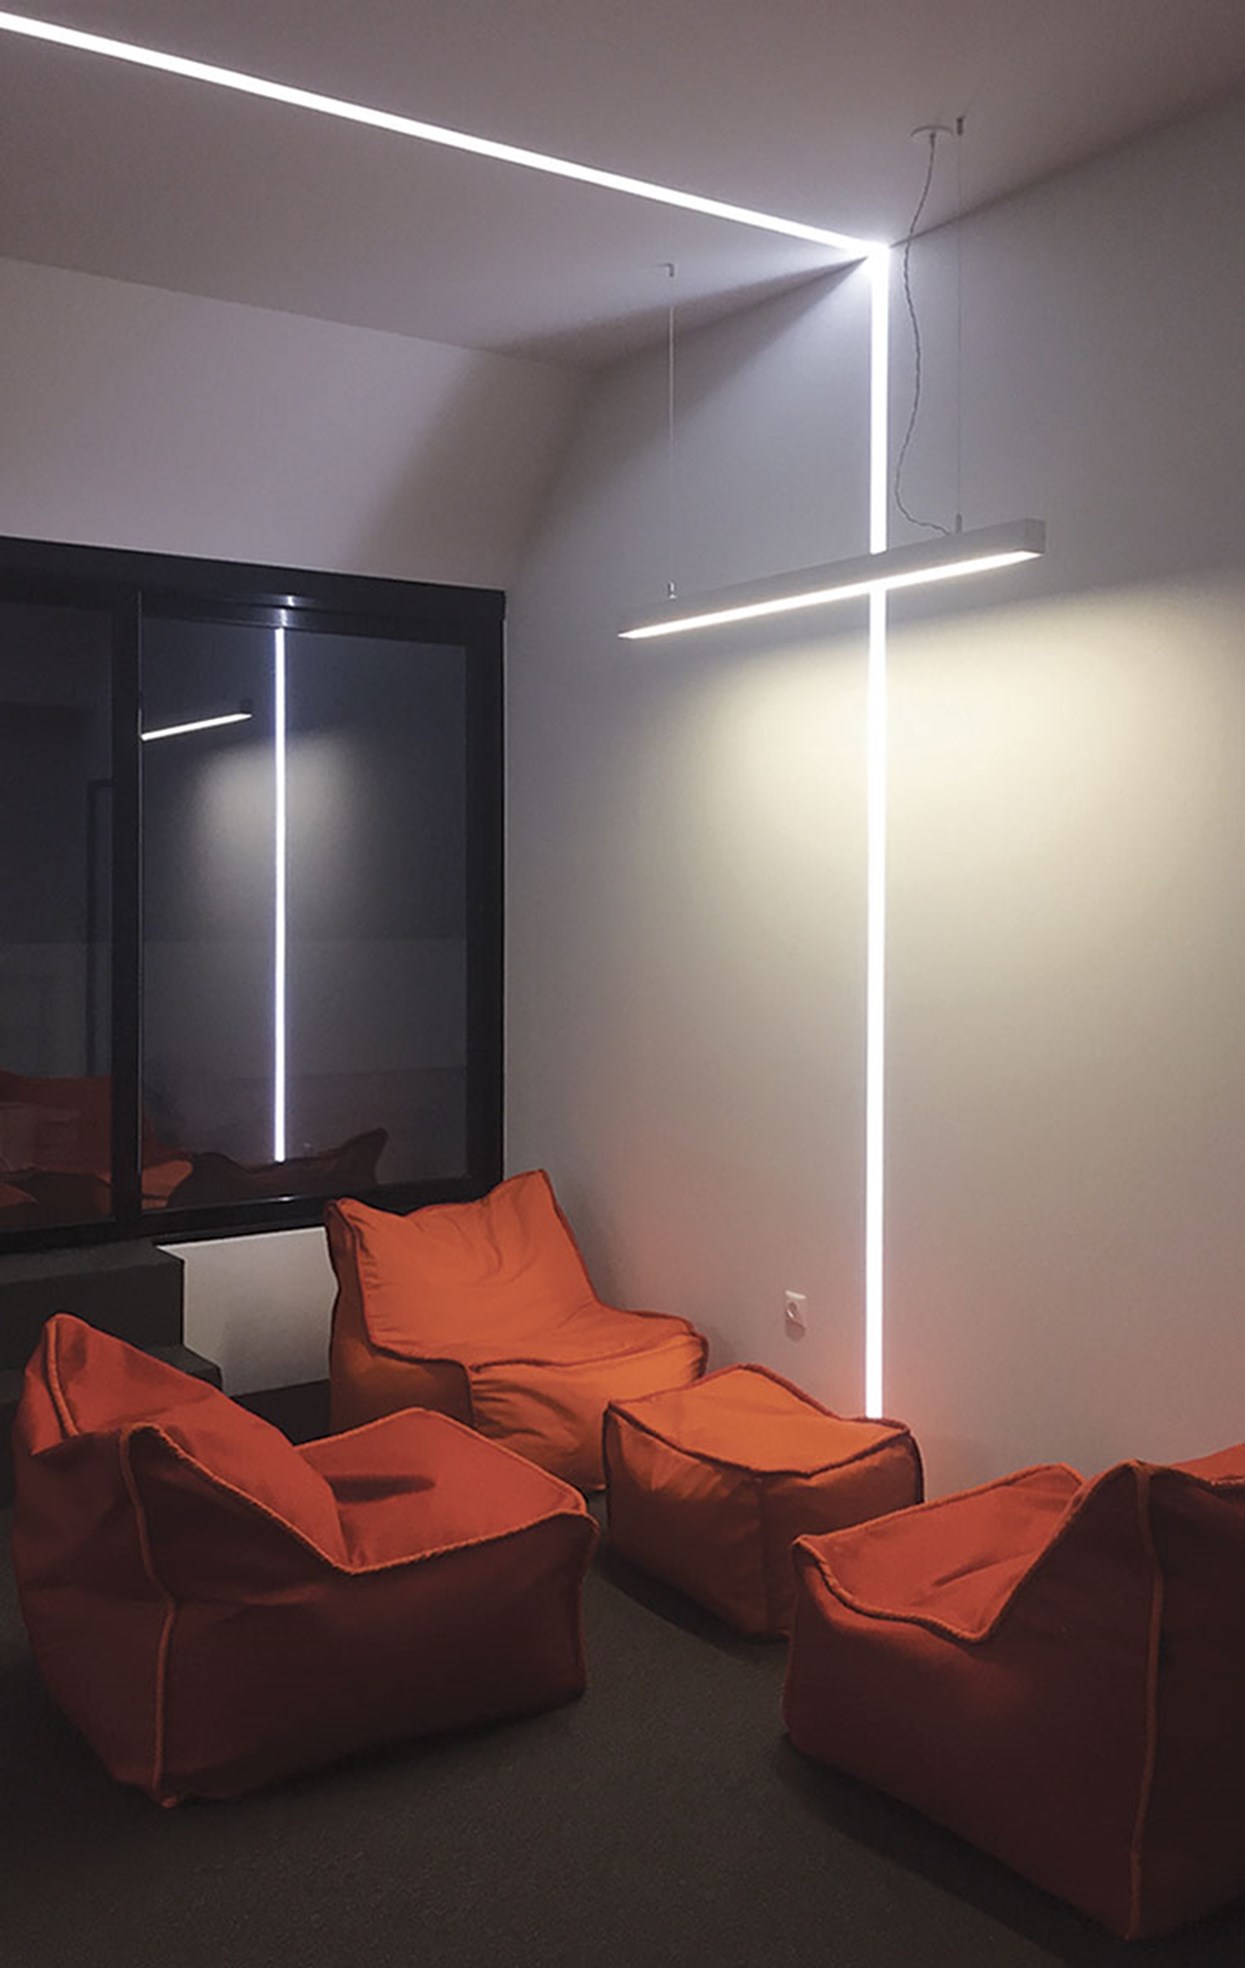 Nama Athina Modular 10 Wall-to-Ceiling Plaster In Linear LED Profile| Image:21